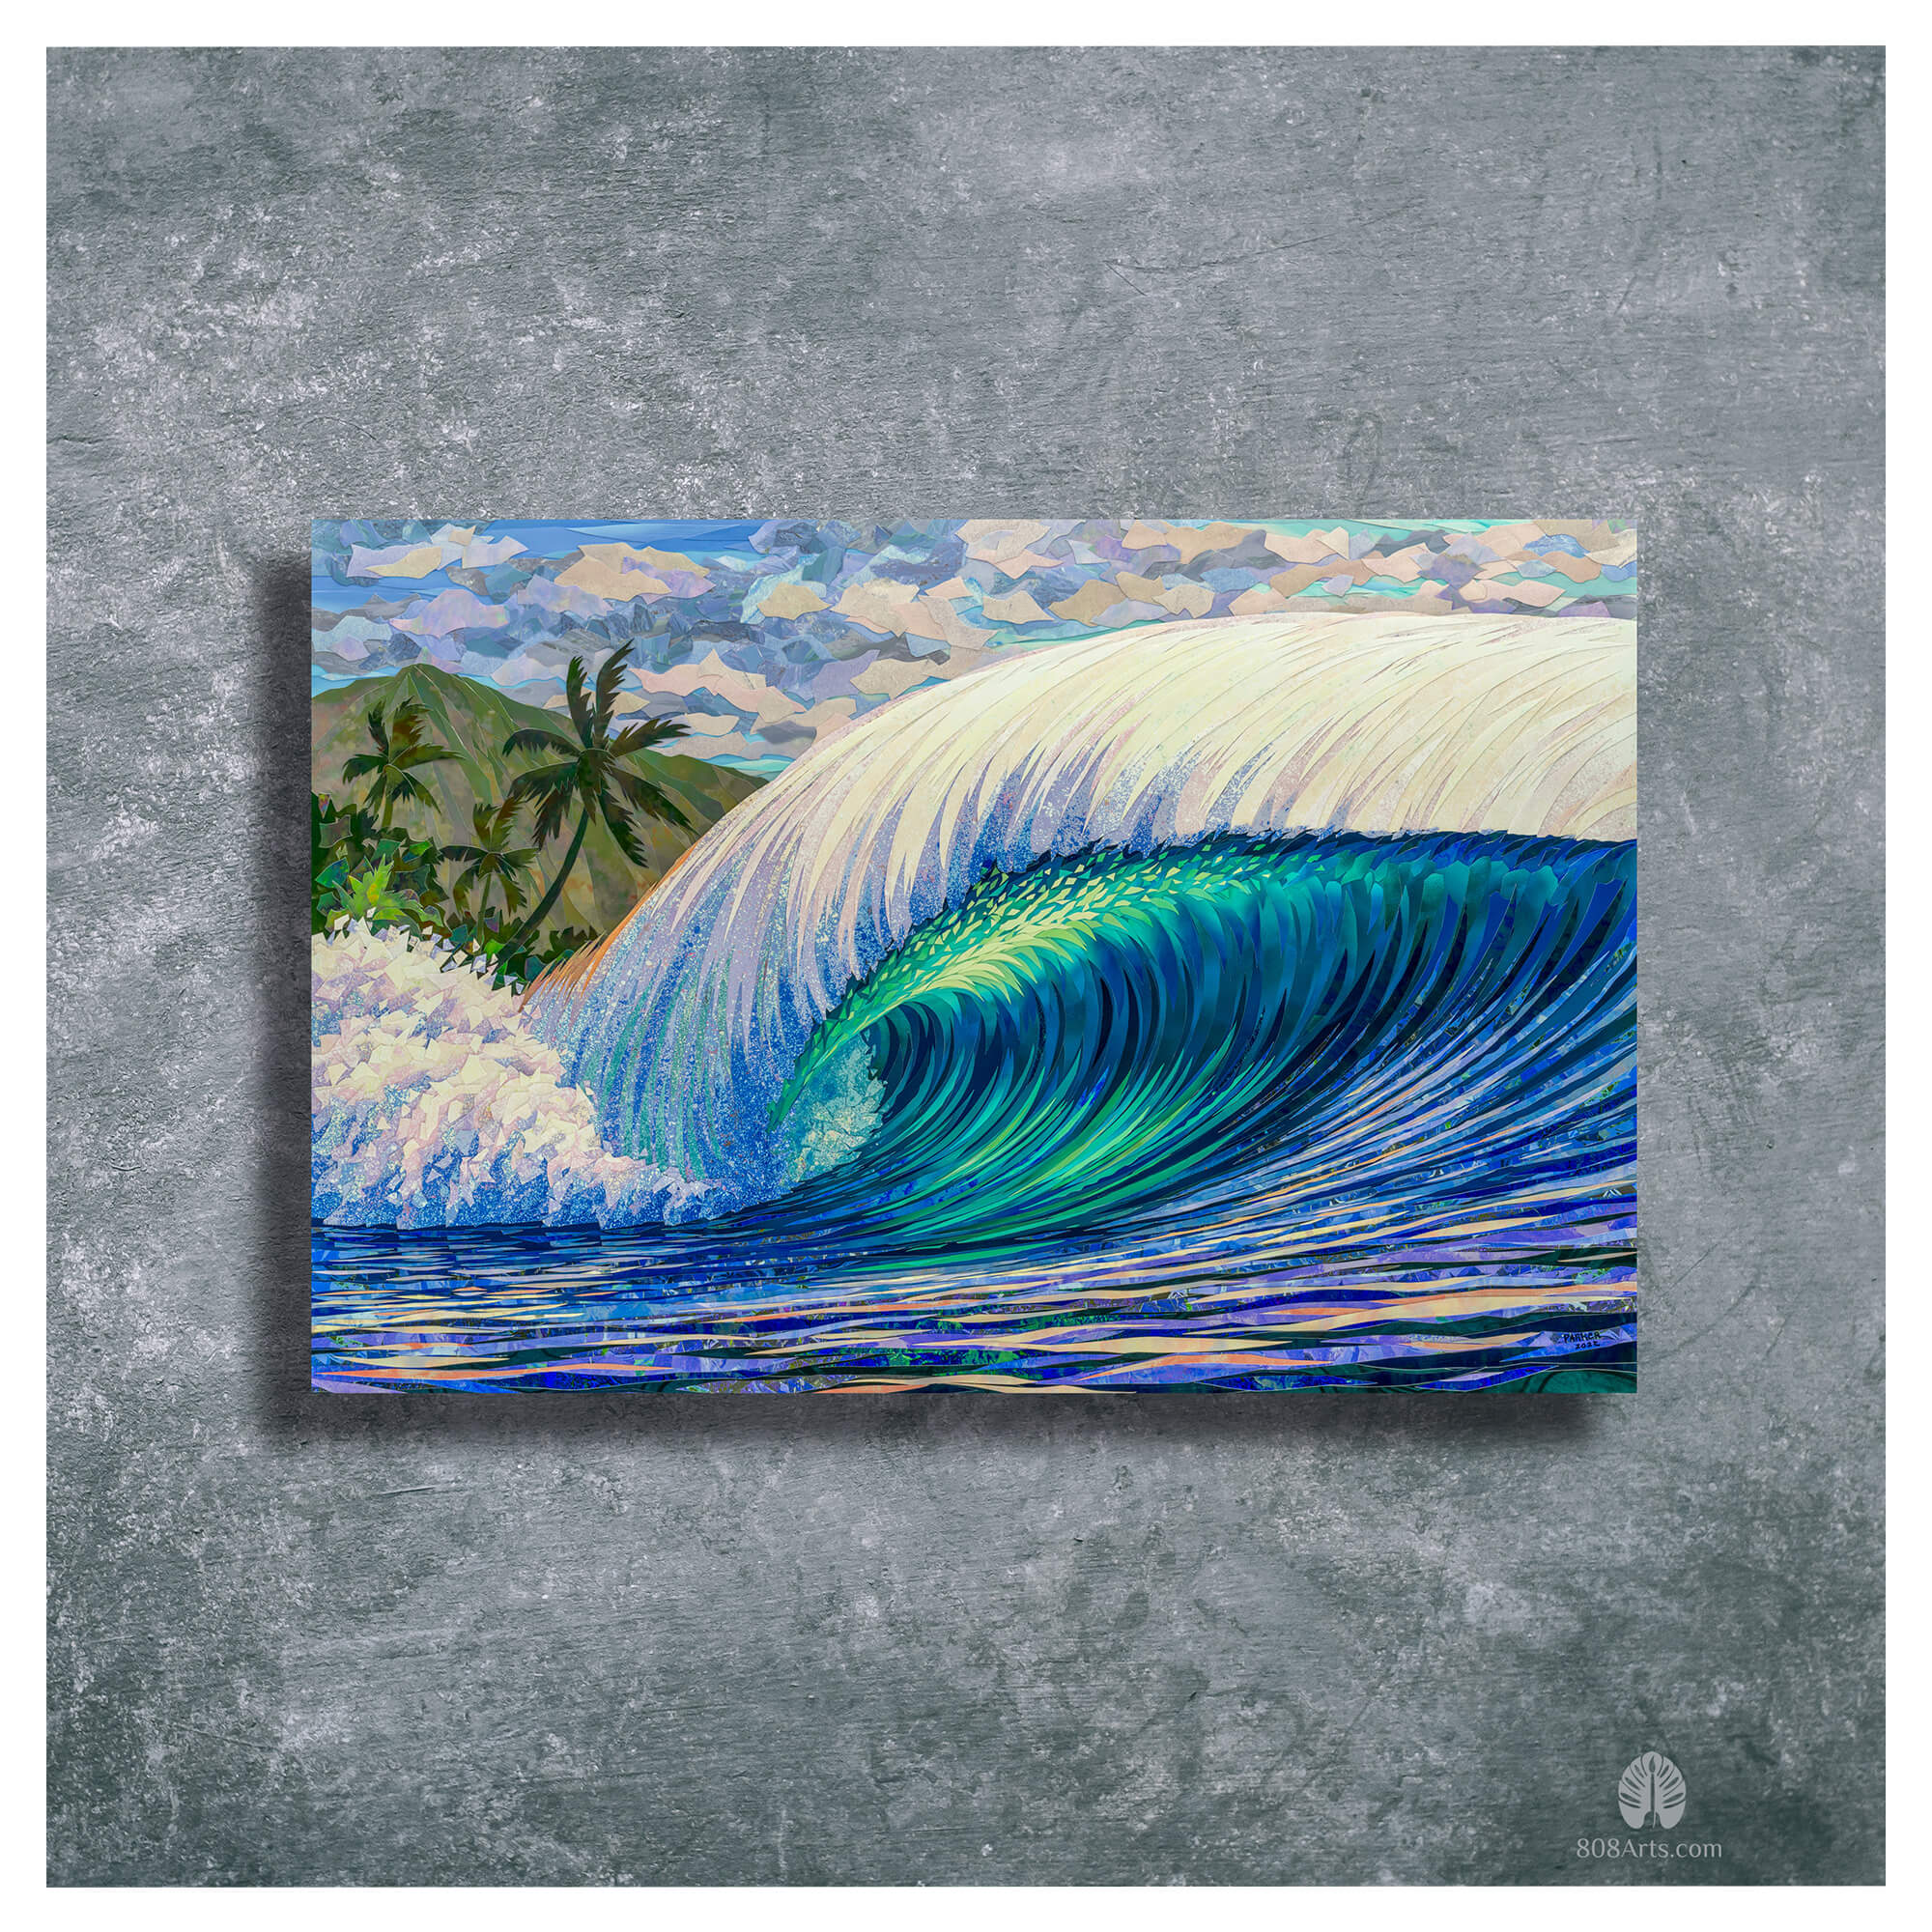 A metal art print featuring a collage of a large colorful rolling wave and a beautiful mountain background, by Maui artist Patrick Parker